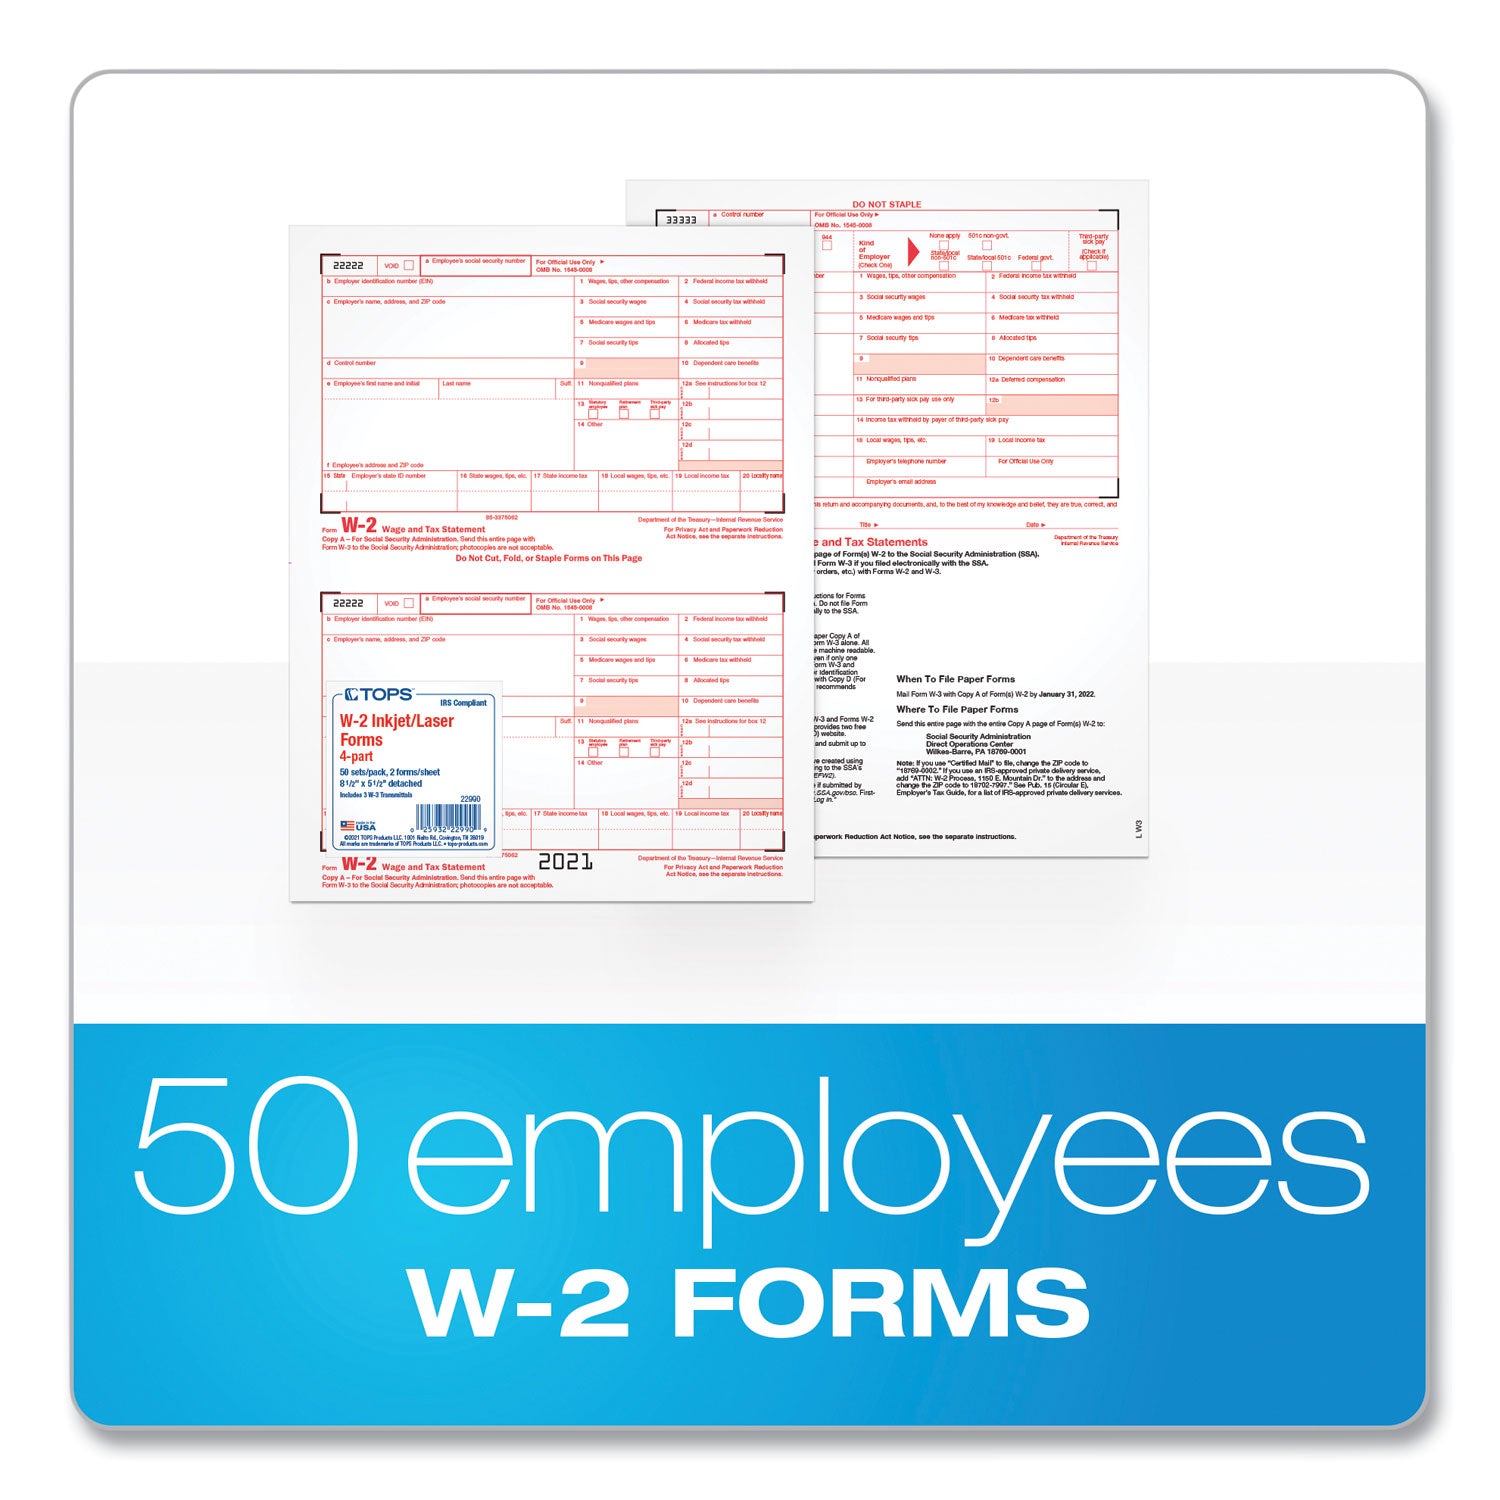 W-2 Tax Forms for Inkjet/Laser Printers, Fiscal Year: 2023, Four-Part Carbonless, 8.5 x 5.5, 2 Forms/Sheet, 50 Forms Total - 